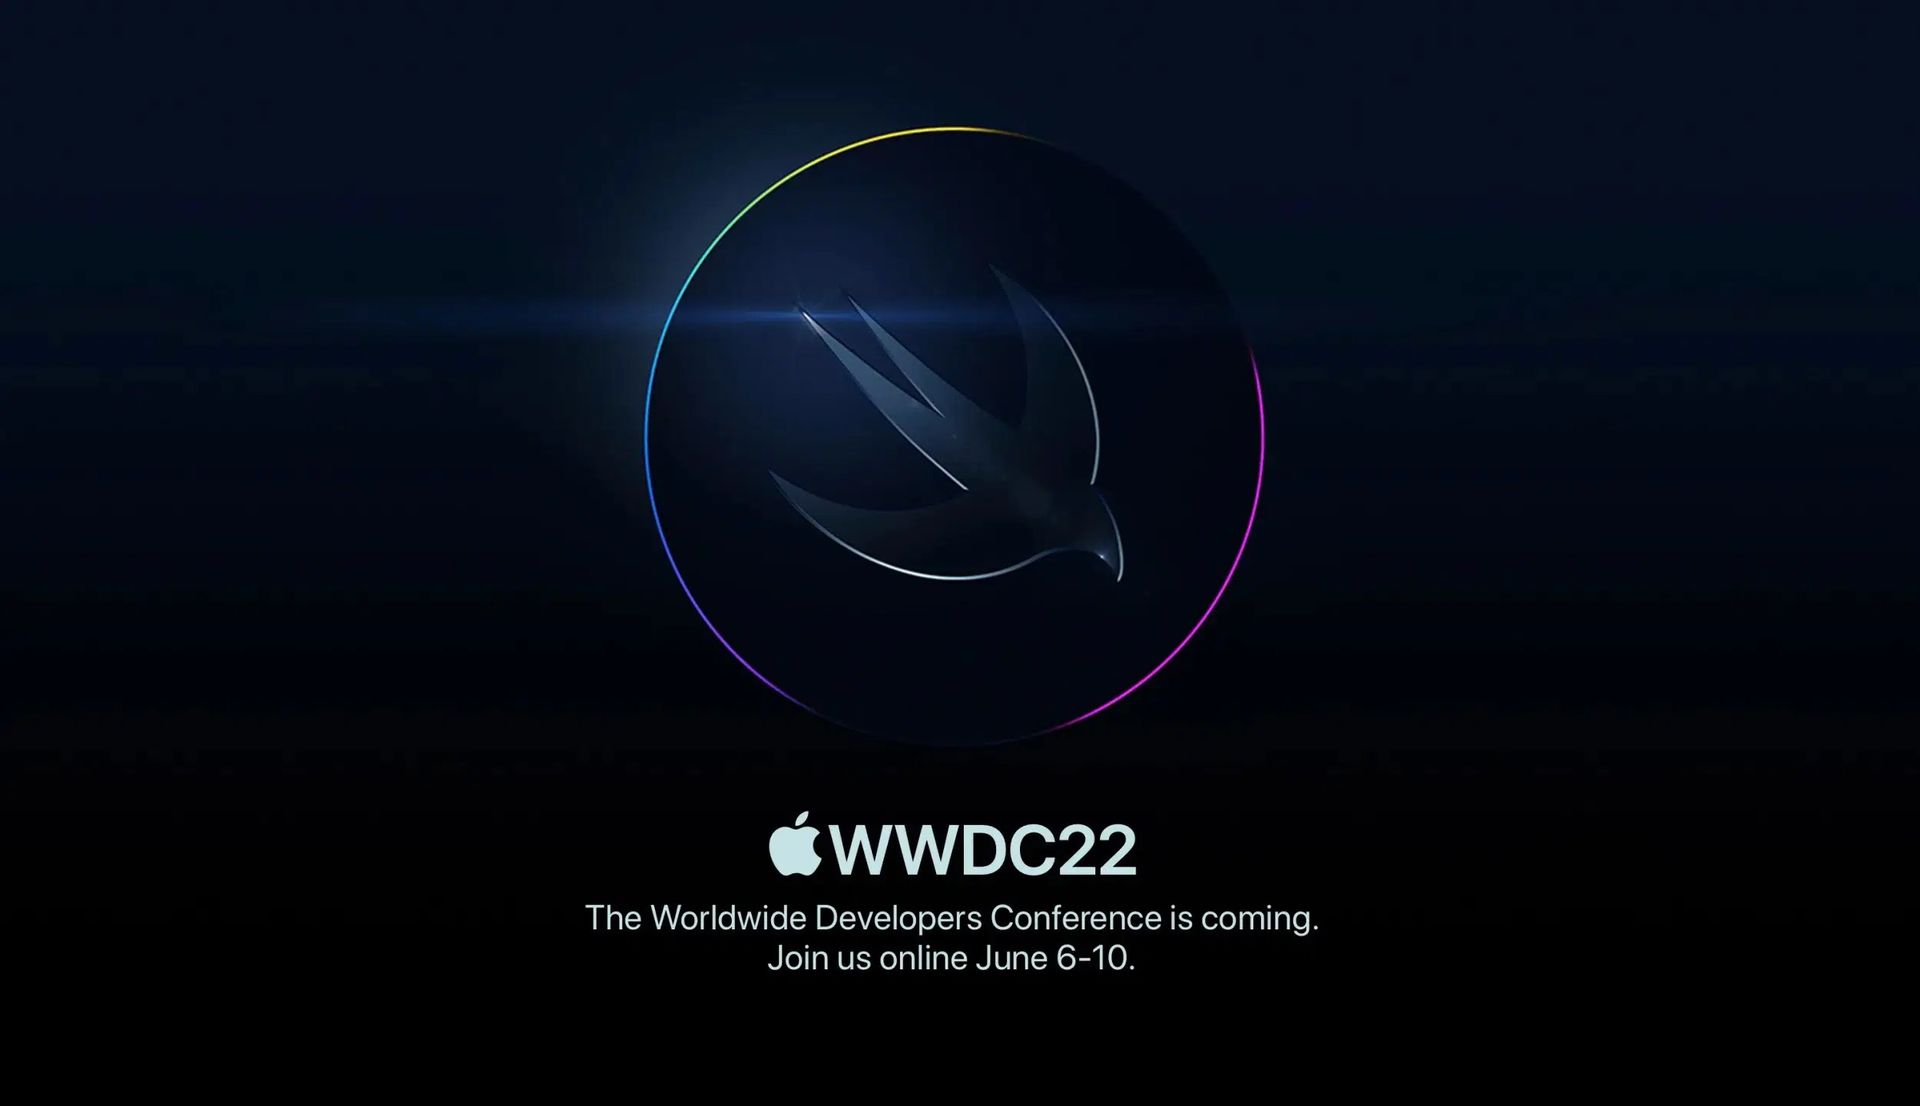 Today is Memorial Day in the United States, and that means Apple WWDC 2022 is swiftly approaching, with excitement mounting for what may be shown at the opening keynote.